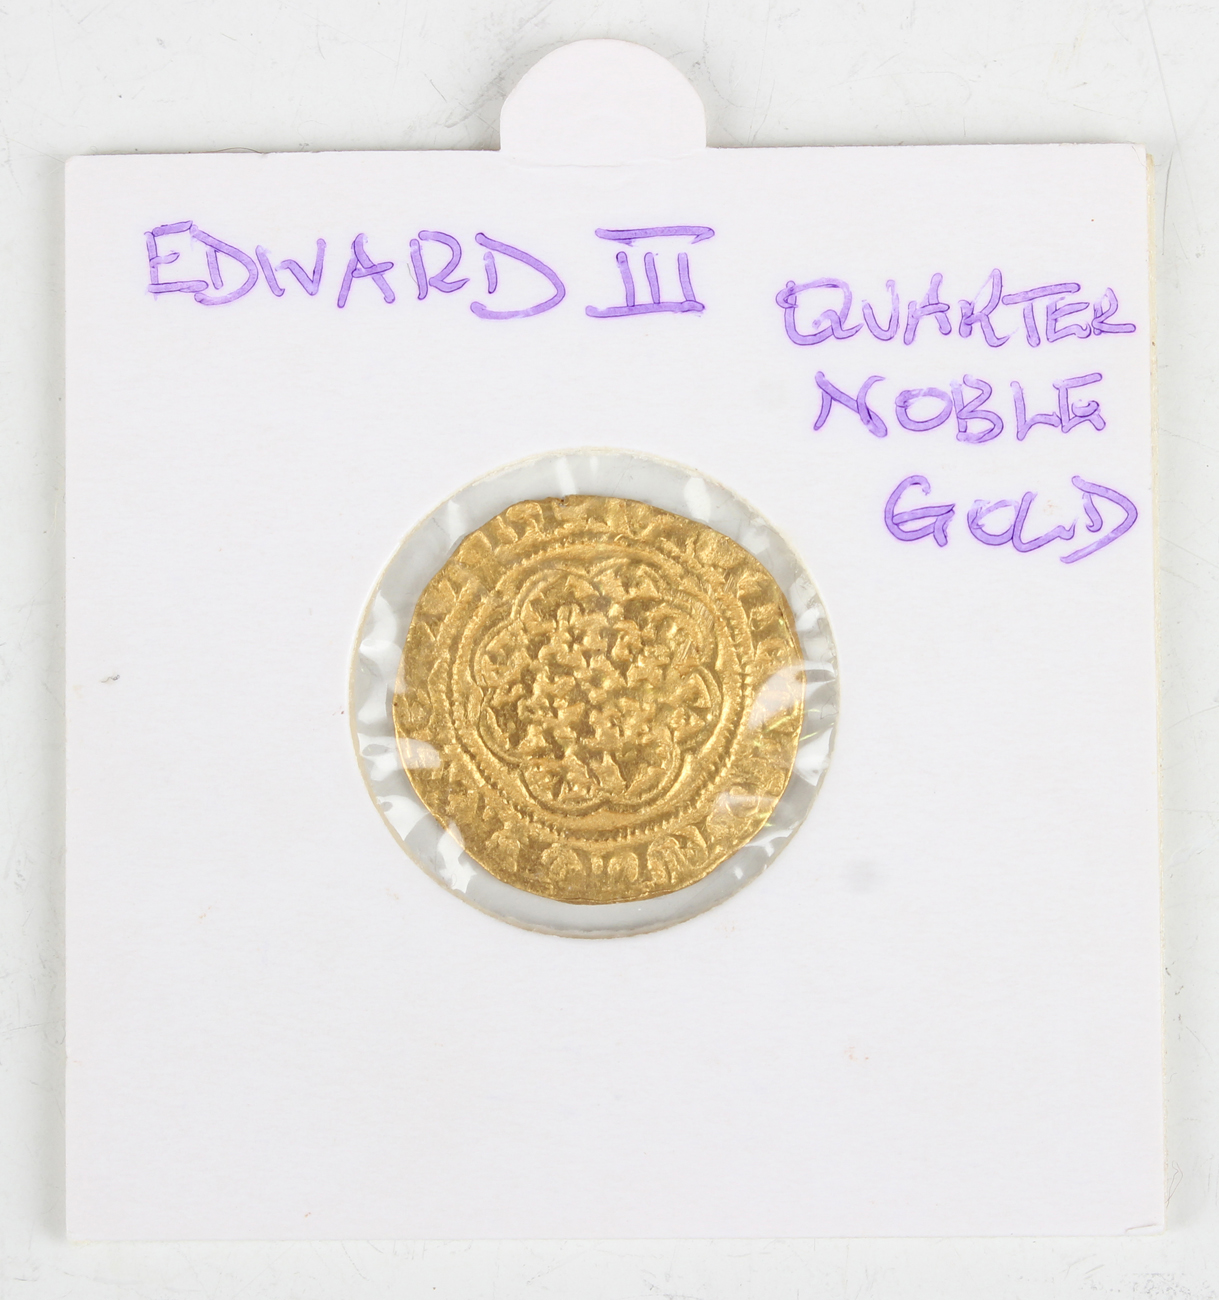 An Edward III gold quarter-noble.Buyer’s Premium 29.4% (including VAT @ 20%) of the hammer price.